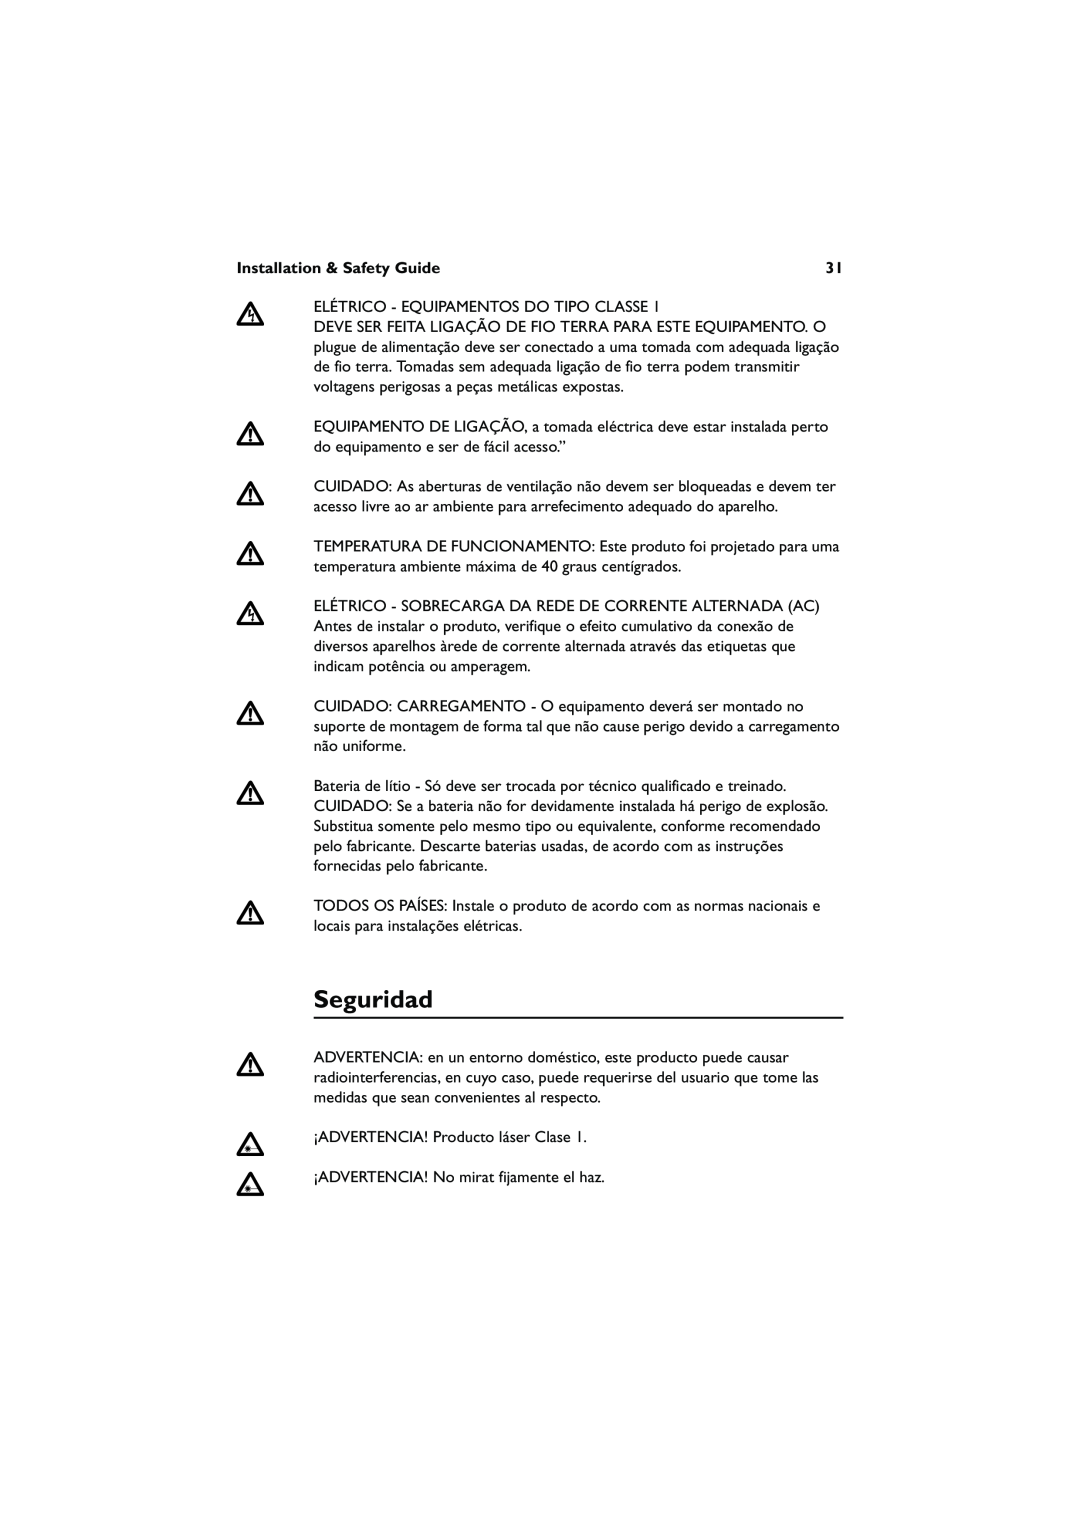 Allied Telesis 8648T/2SP, 8624T/2M, AT-8624POE manual Seguridad, Installation & Safety Guide 